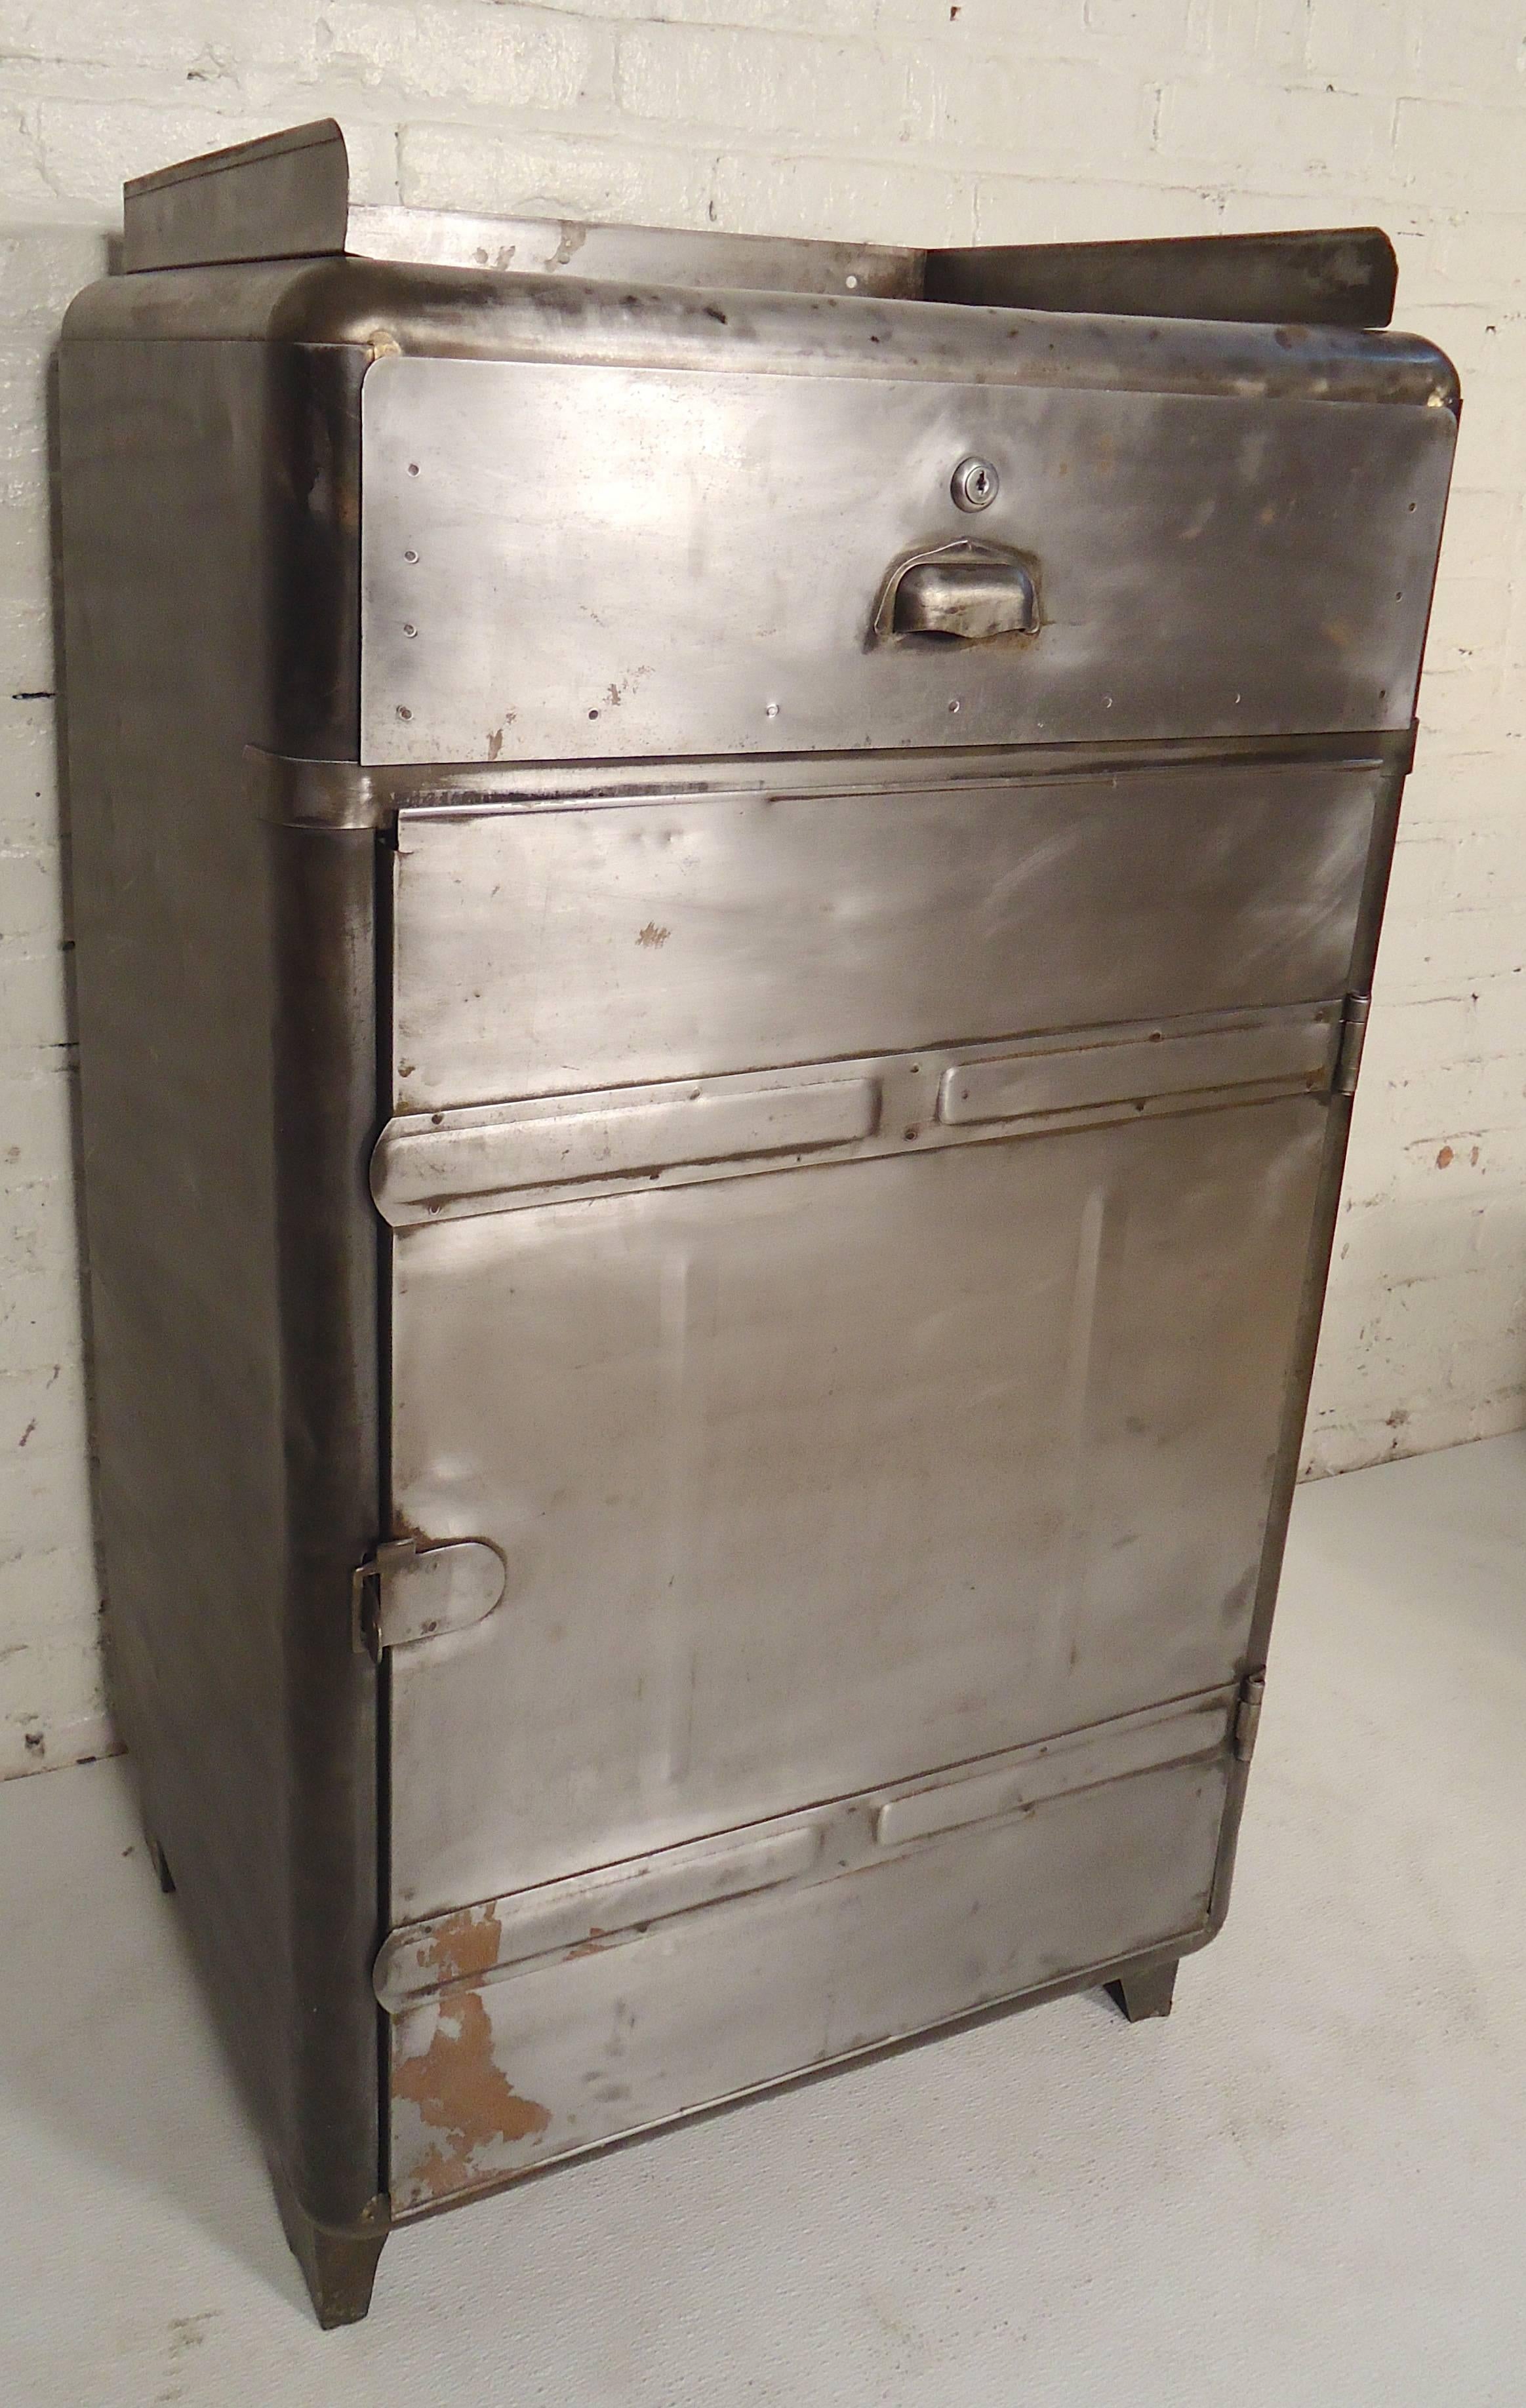 This Industrial metal cabinet makes a great bathroom storage cabinet. It has been stripped, sanded and given a bare metal style finish.

(Please confirm item location - NY or NJ - with dealer).
 